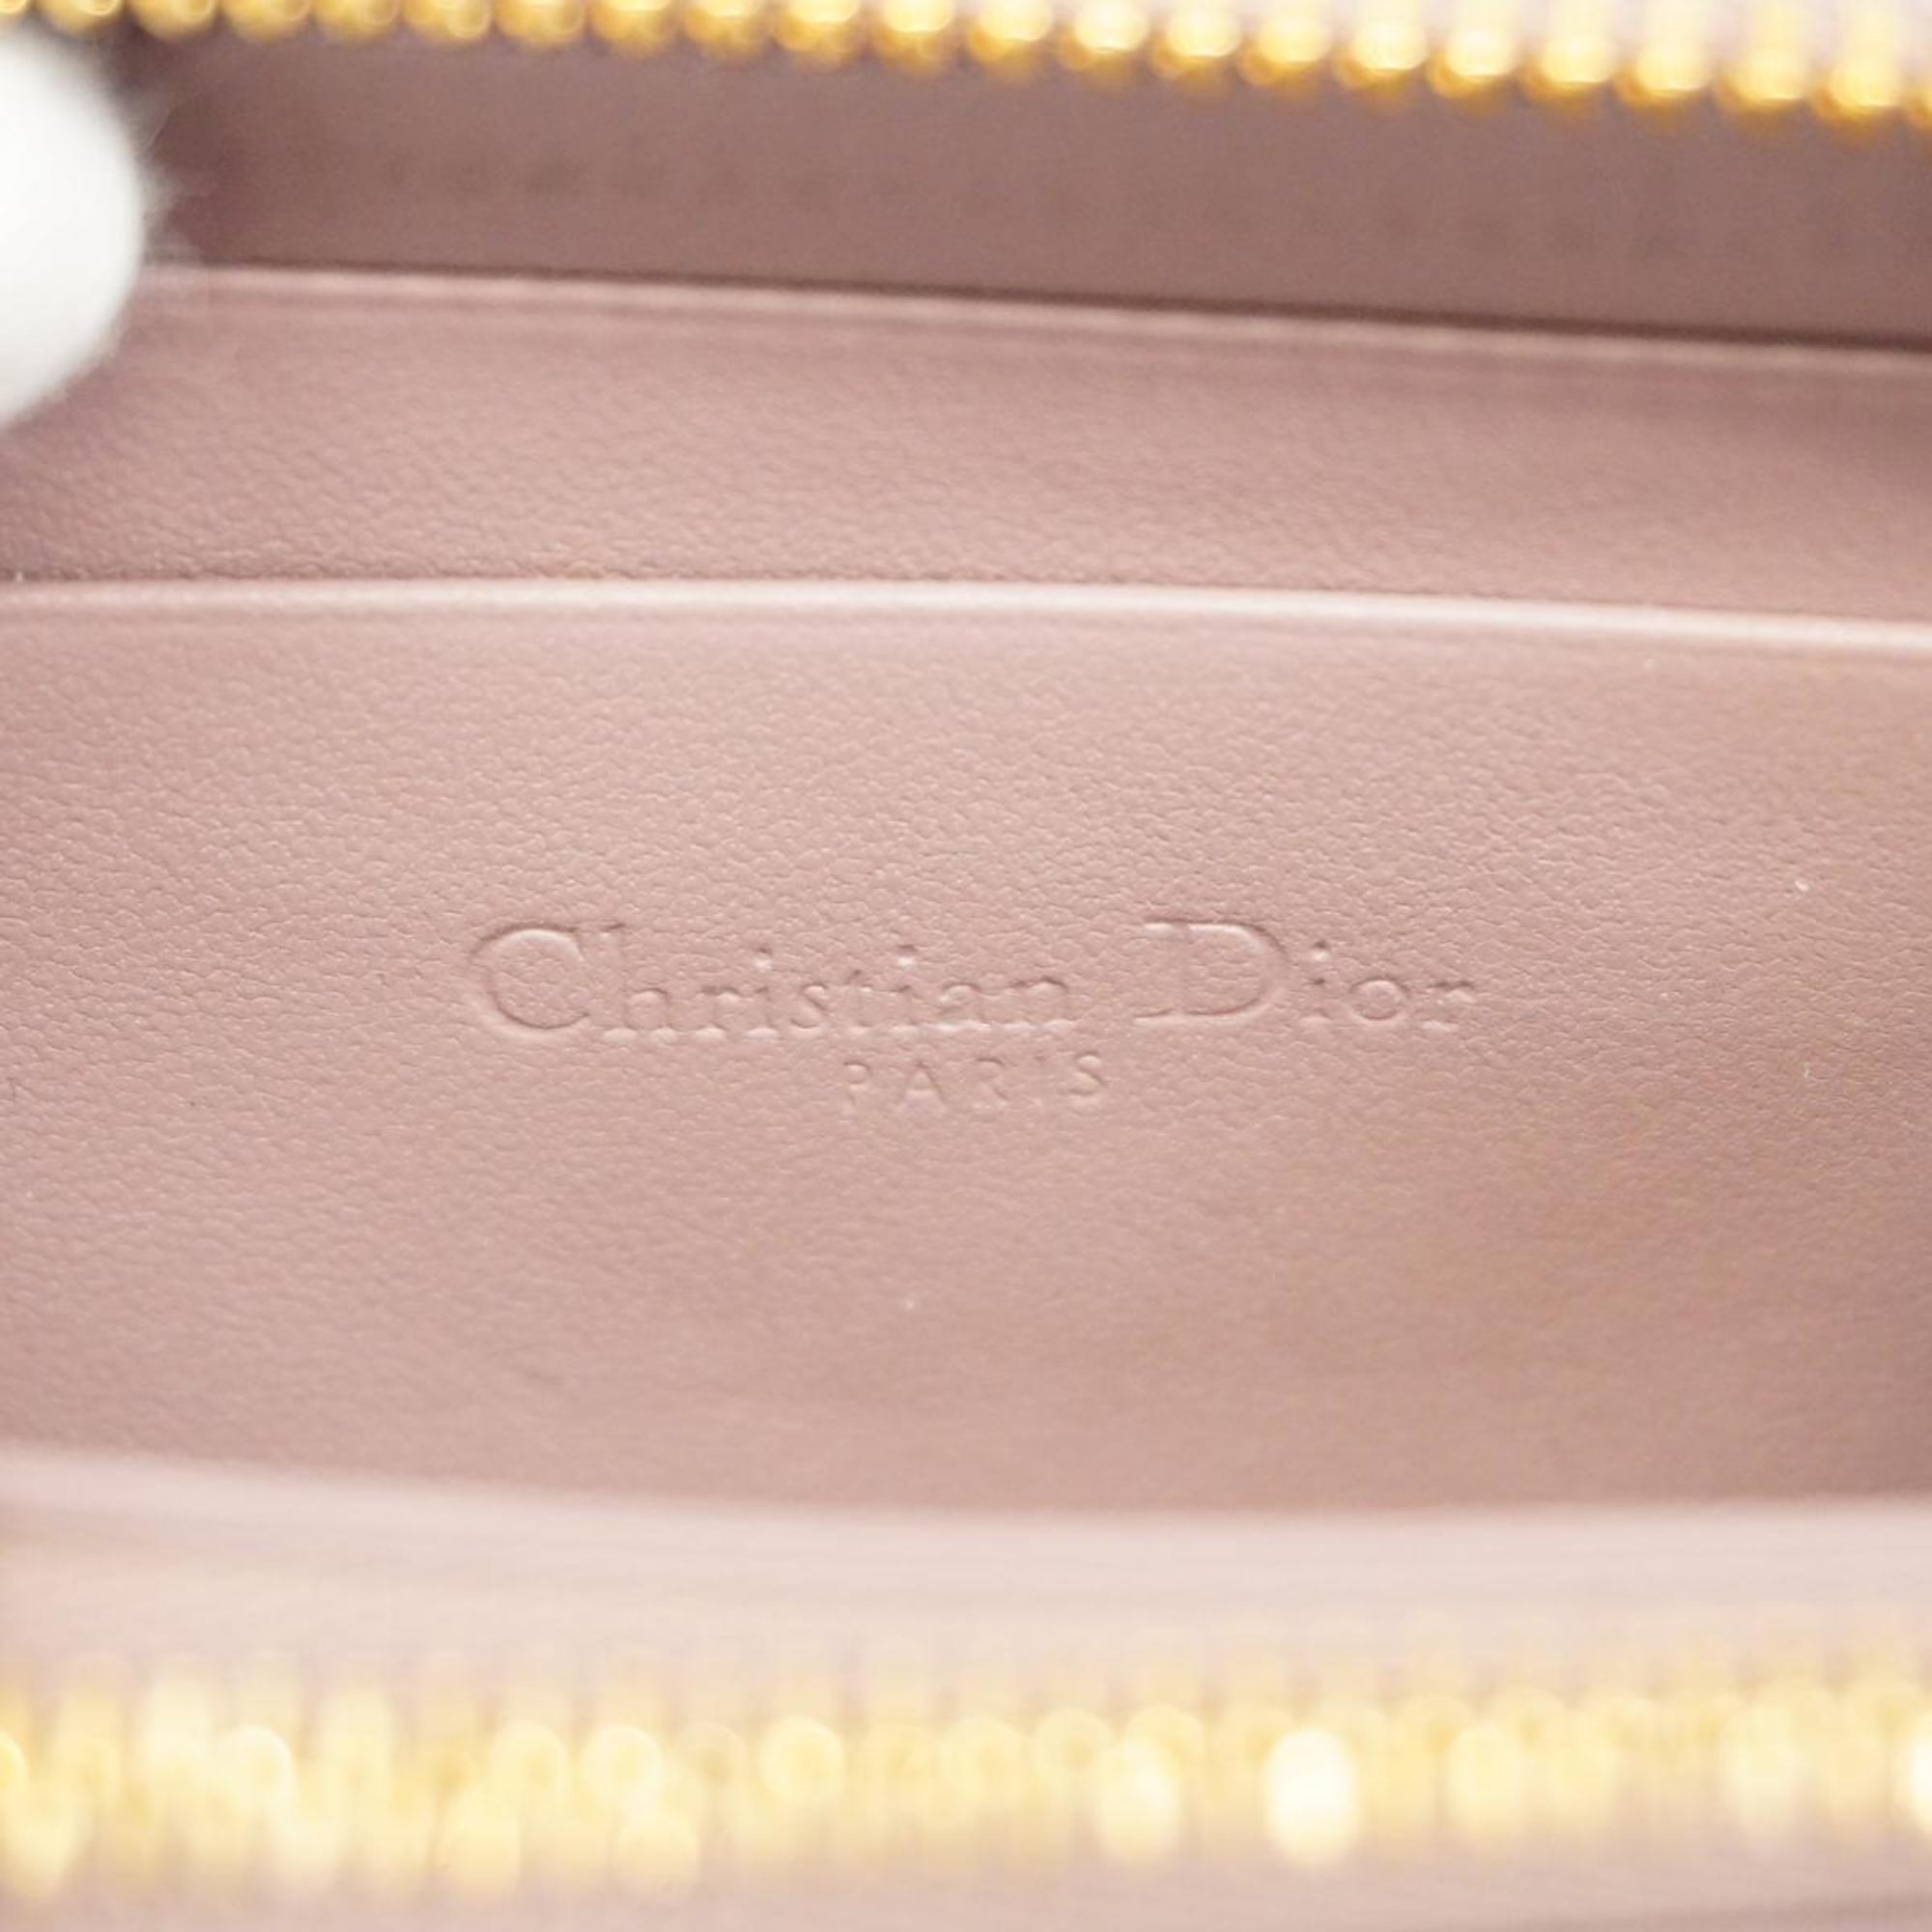 Christian Dior Wallet/Coin Case Cannage Leather Purple Women's